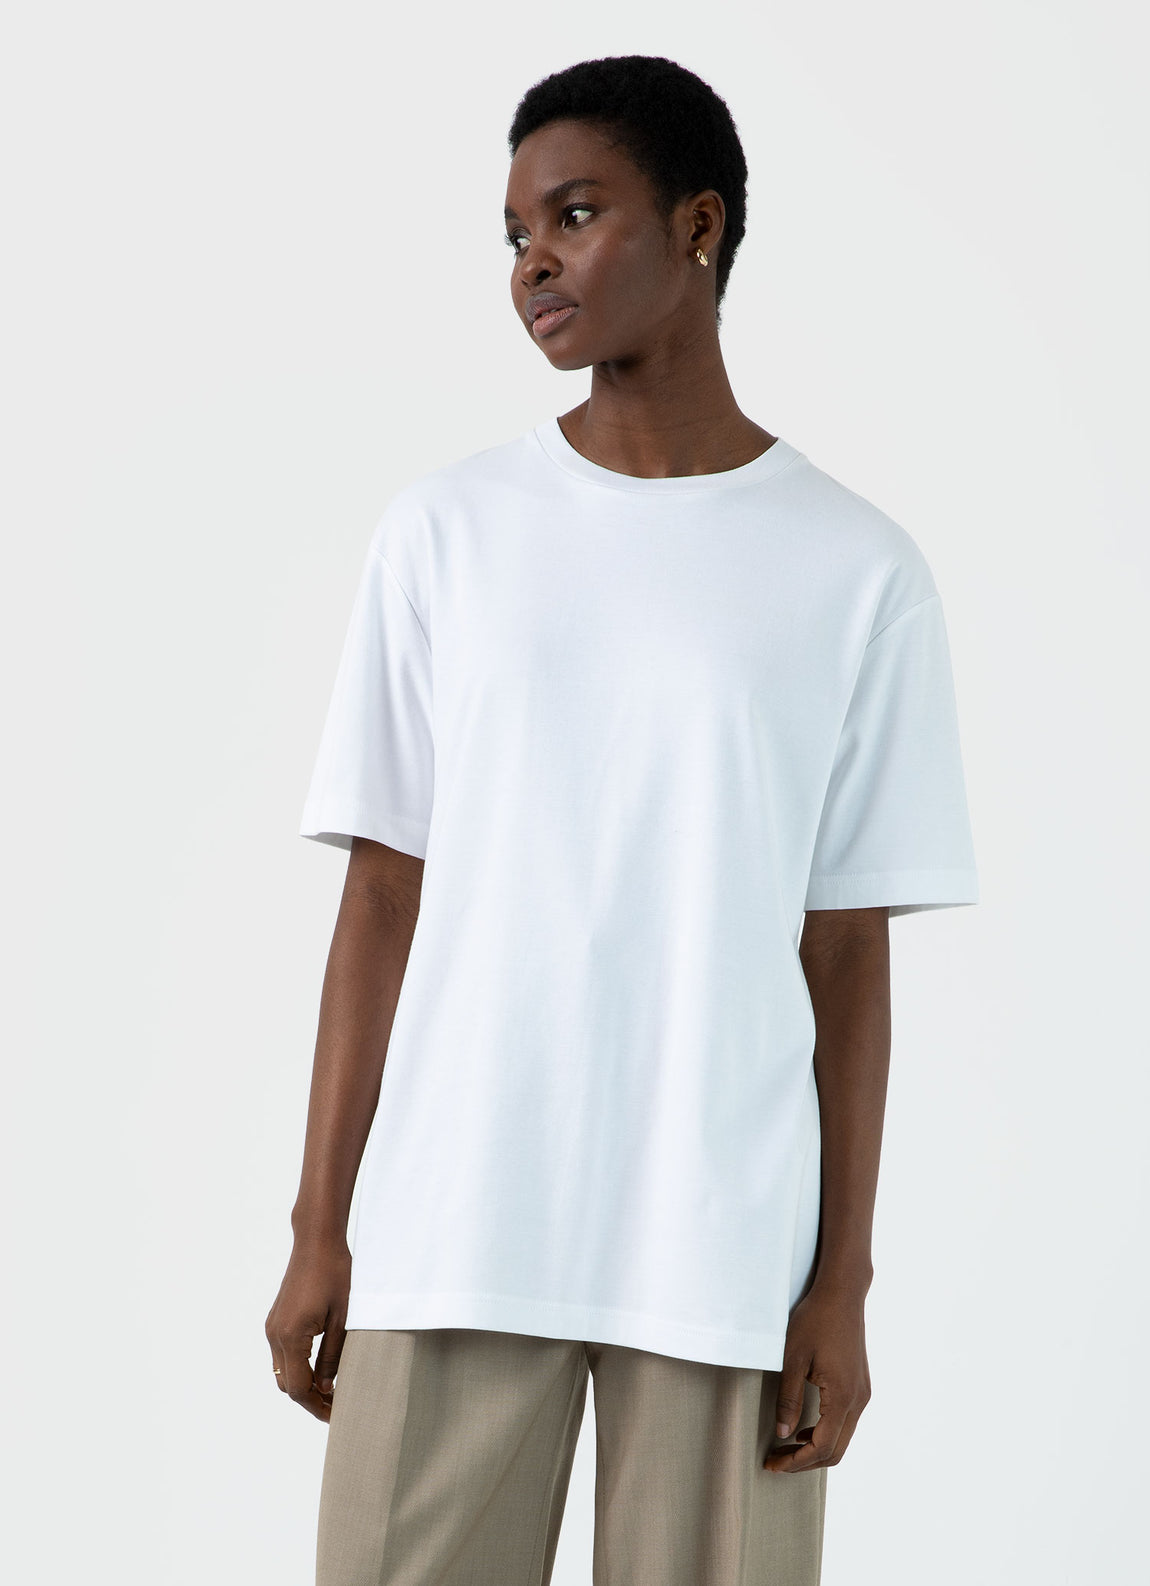 Camel Ribbed Exposed Seam T-Shirt